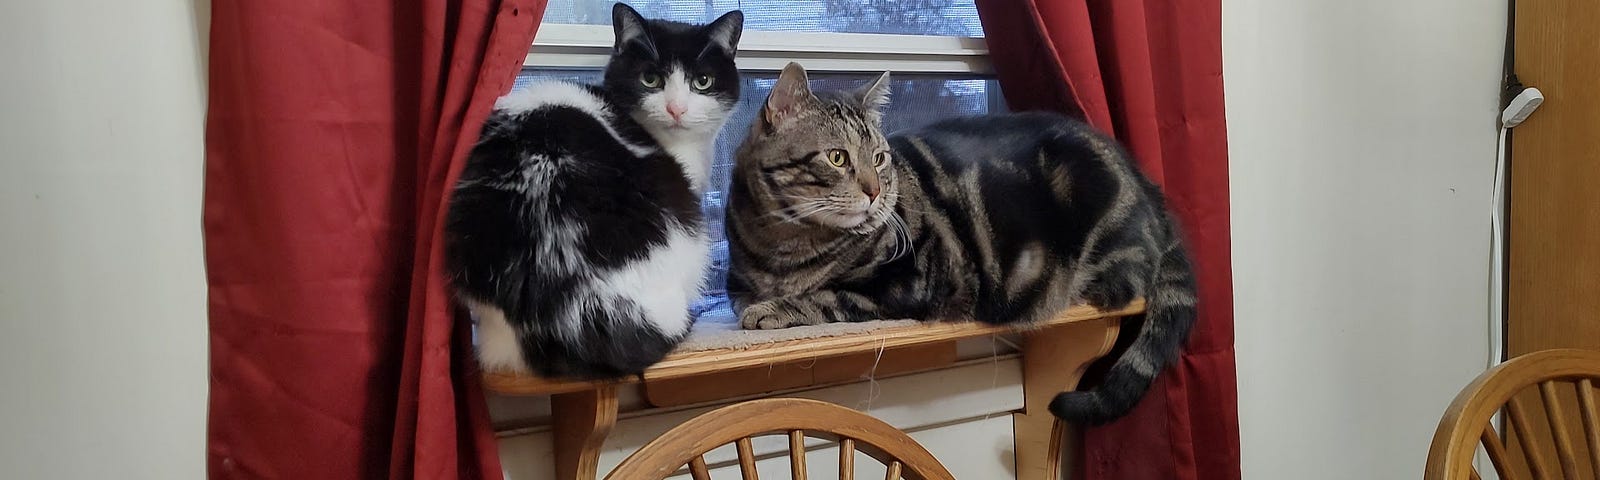 Two of our kitties on the dining room window perch, Bandit and Gus